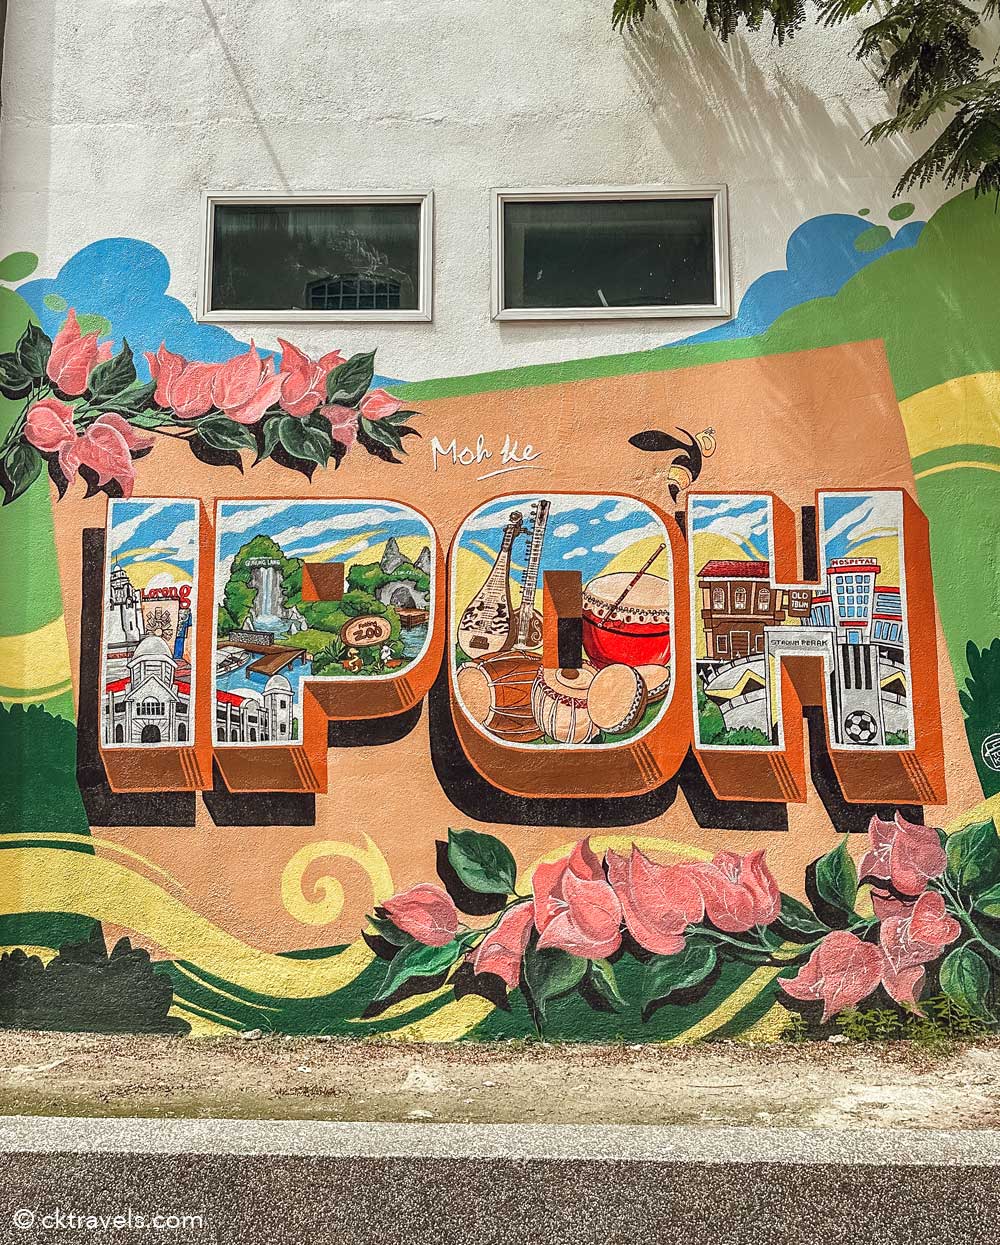 Ipoh Malaysia - Epic Things To Do